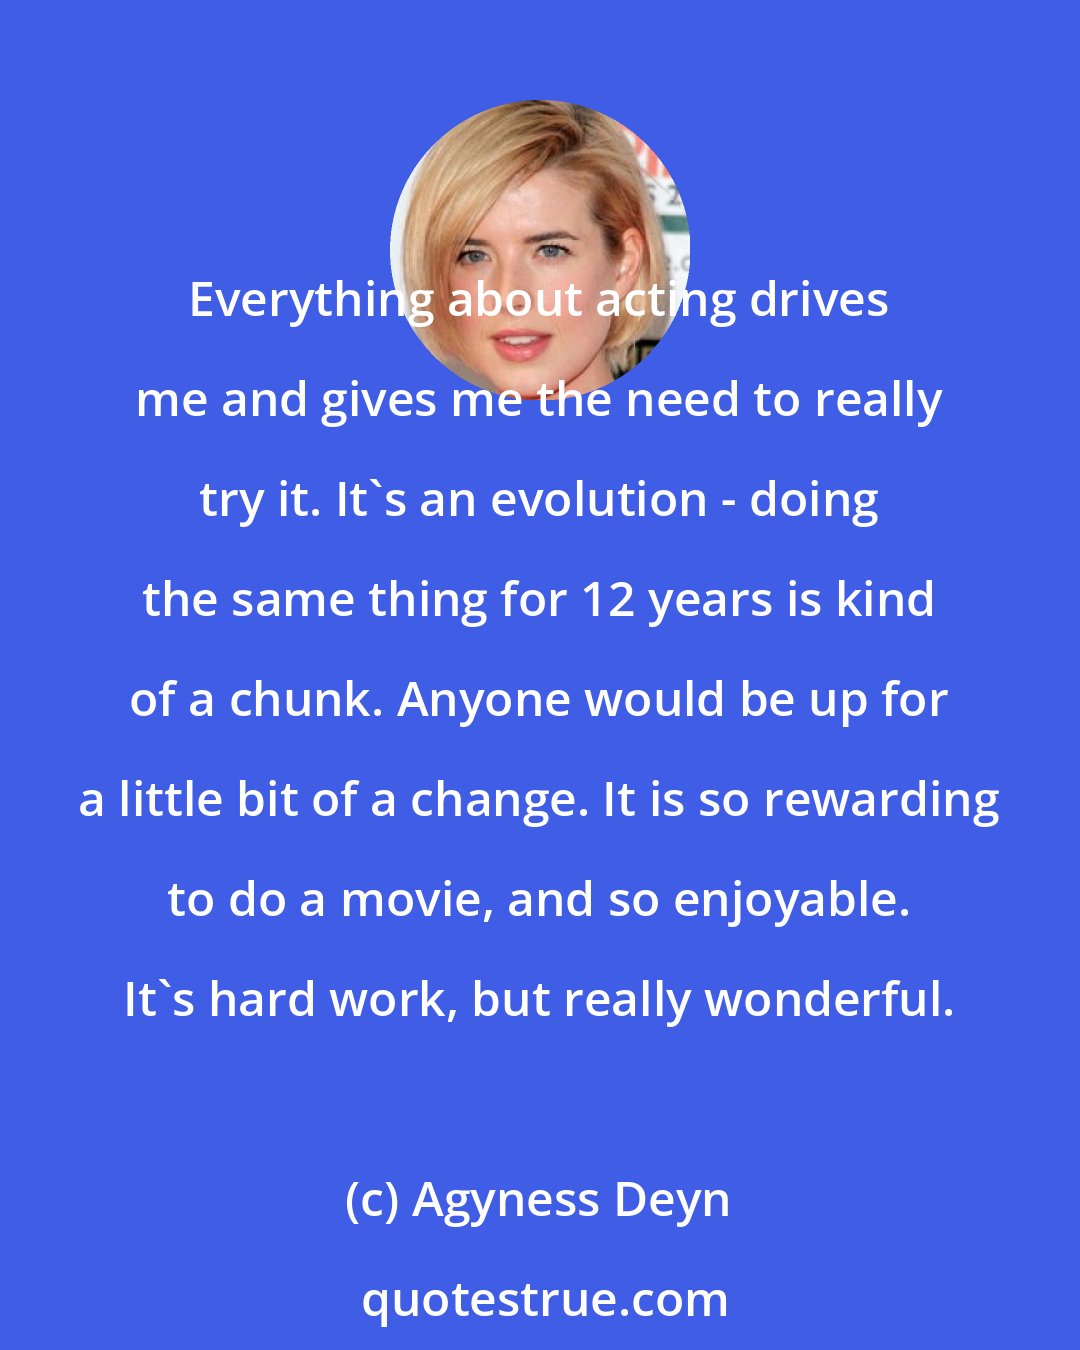 Agyness Deyn: Everything about acting drives me and gives me the need to really try it. It's an evolution - doing the same thing for 12 years is kind of a chunk. Anyone would be up for a little bit of a change. It is so rewarding to do a movie, and so enjoyable. It's hard work, but really wonderful.